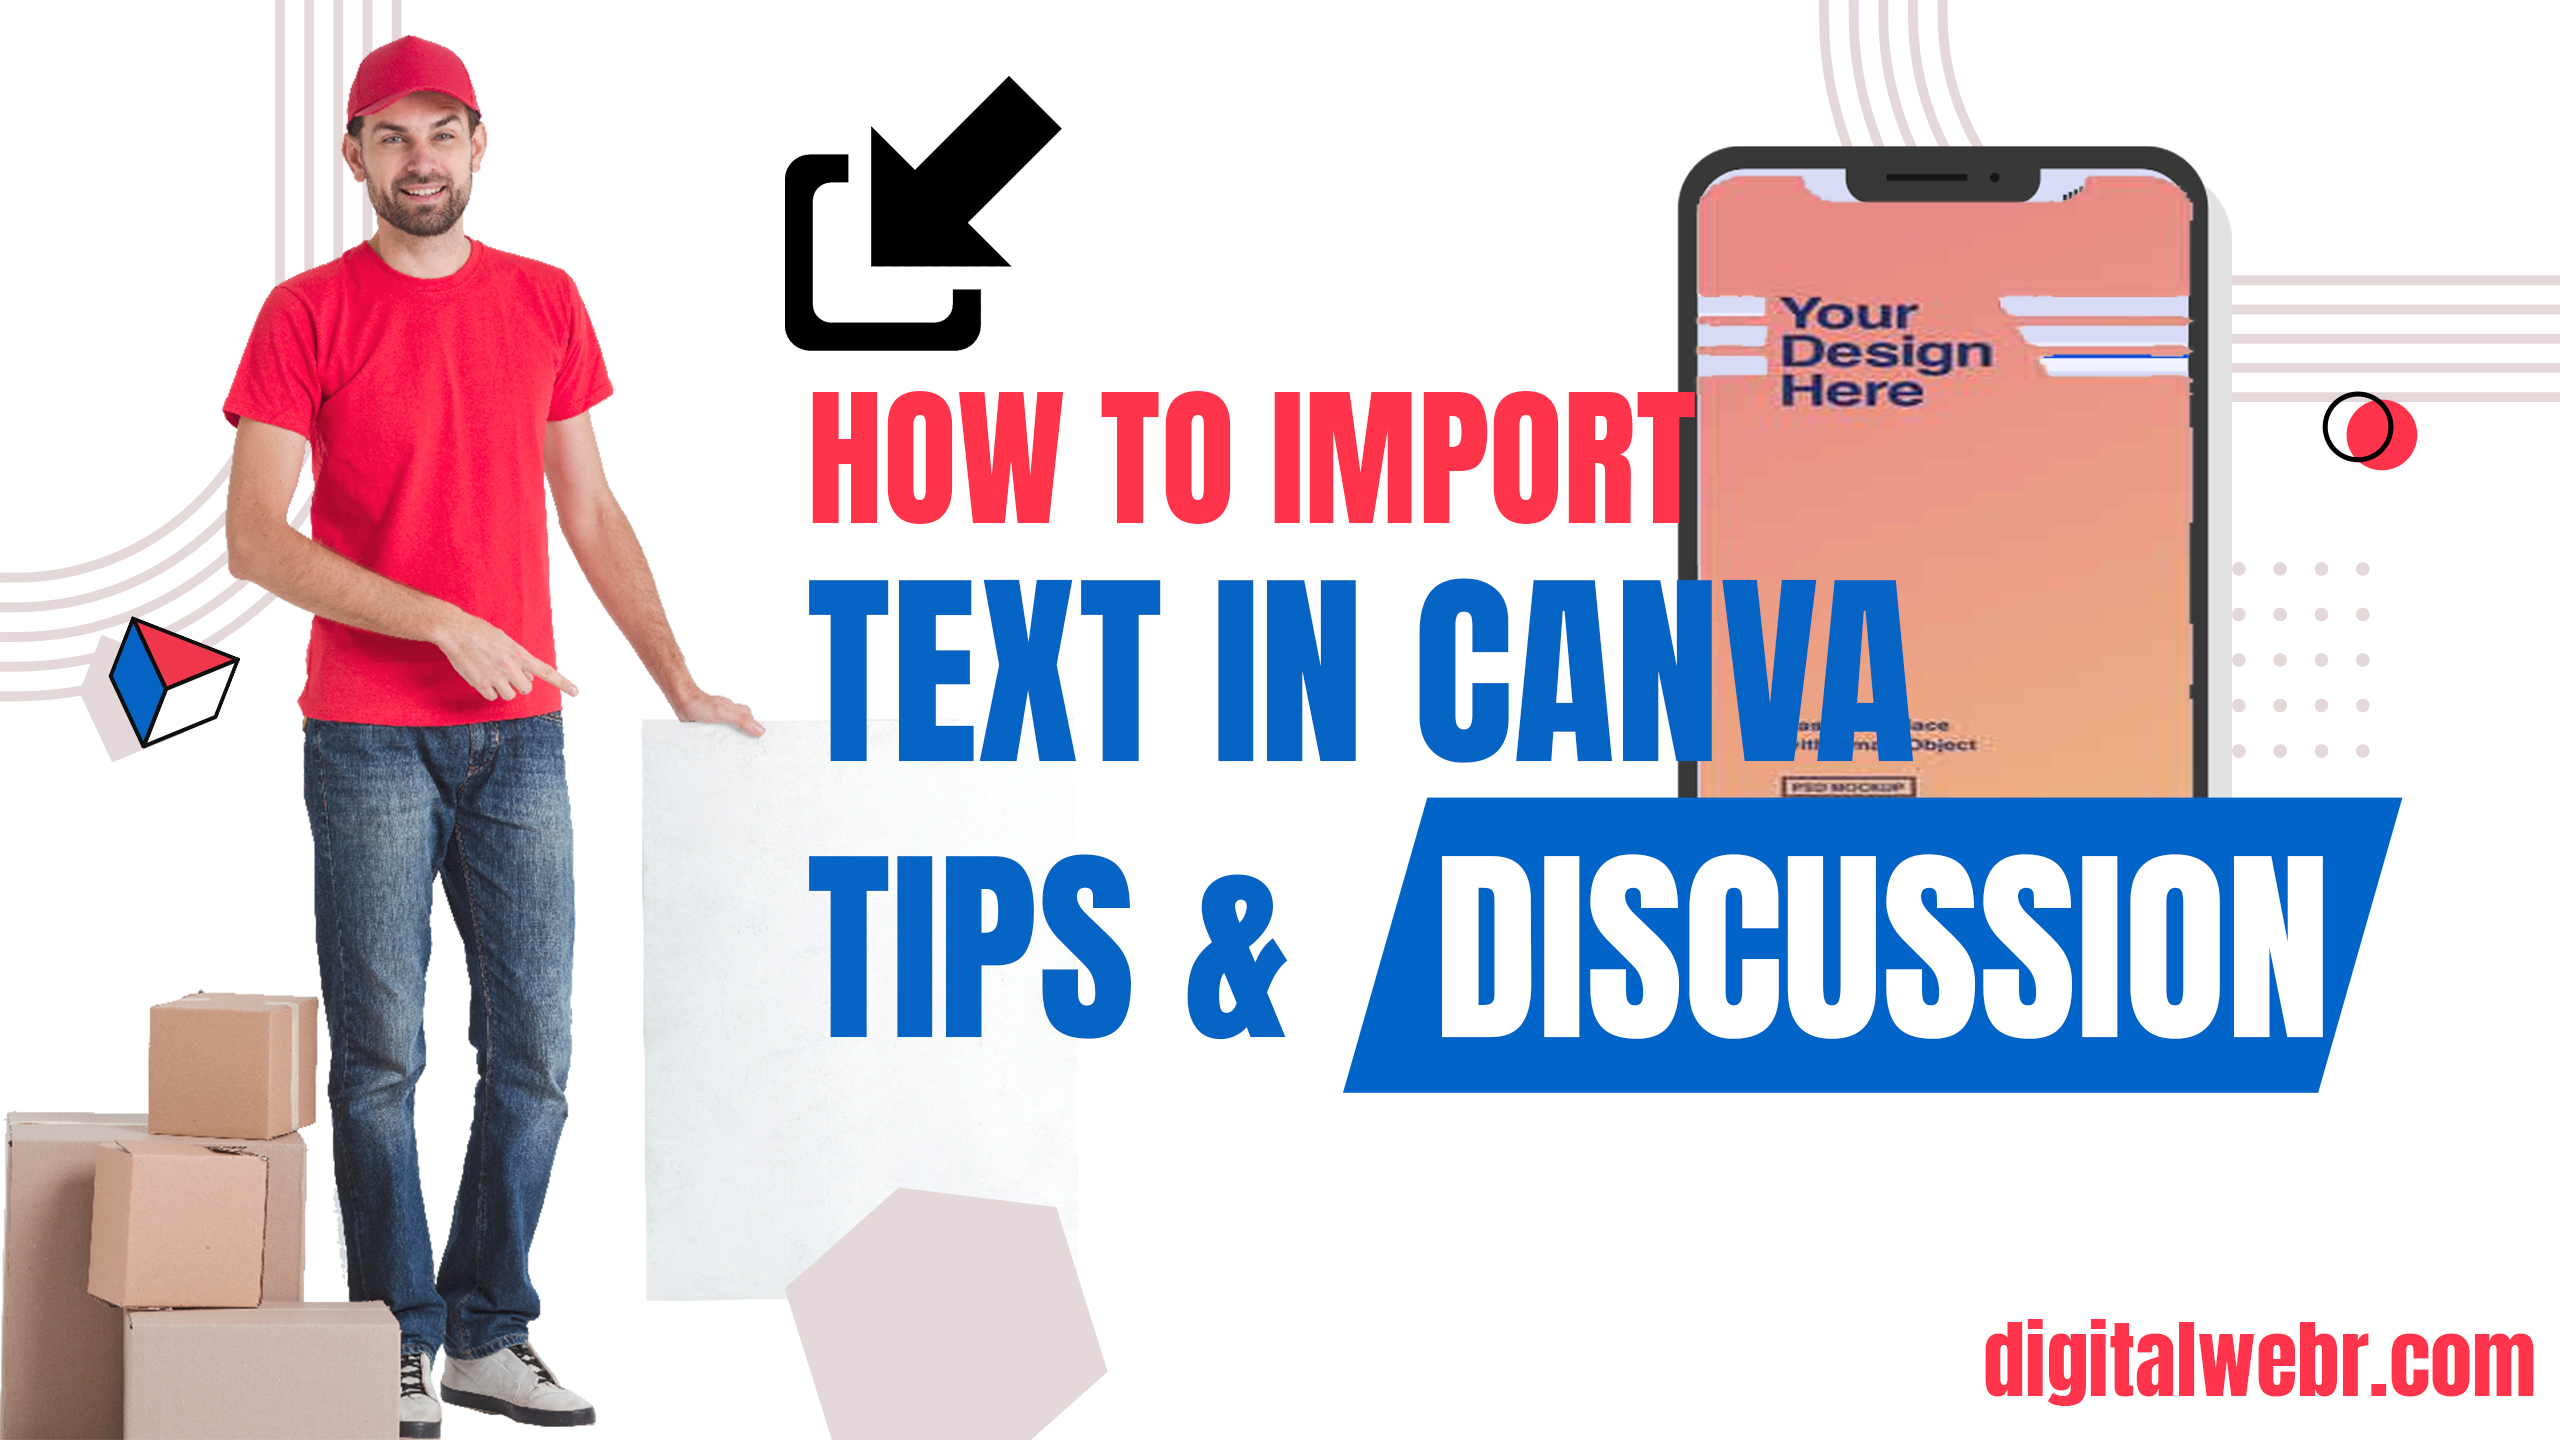 How to import text into canva